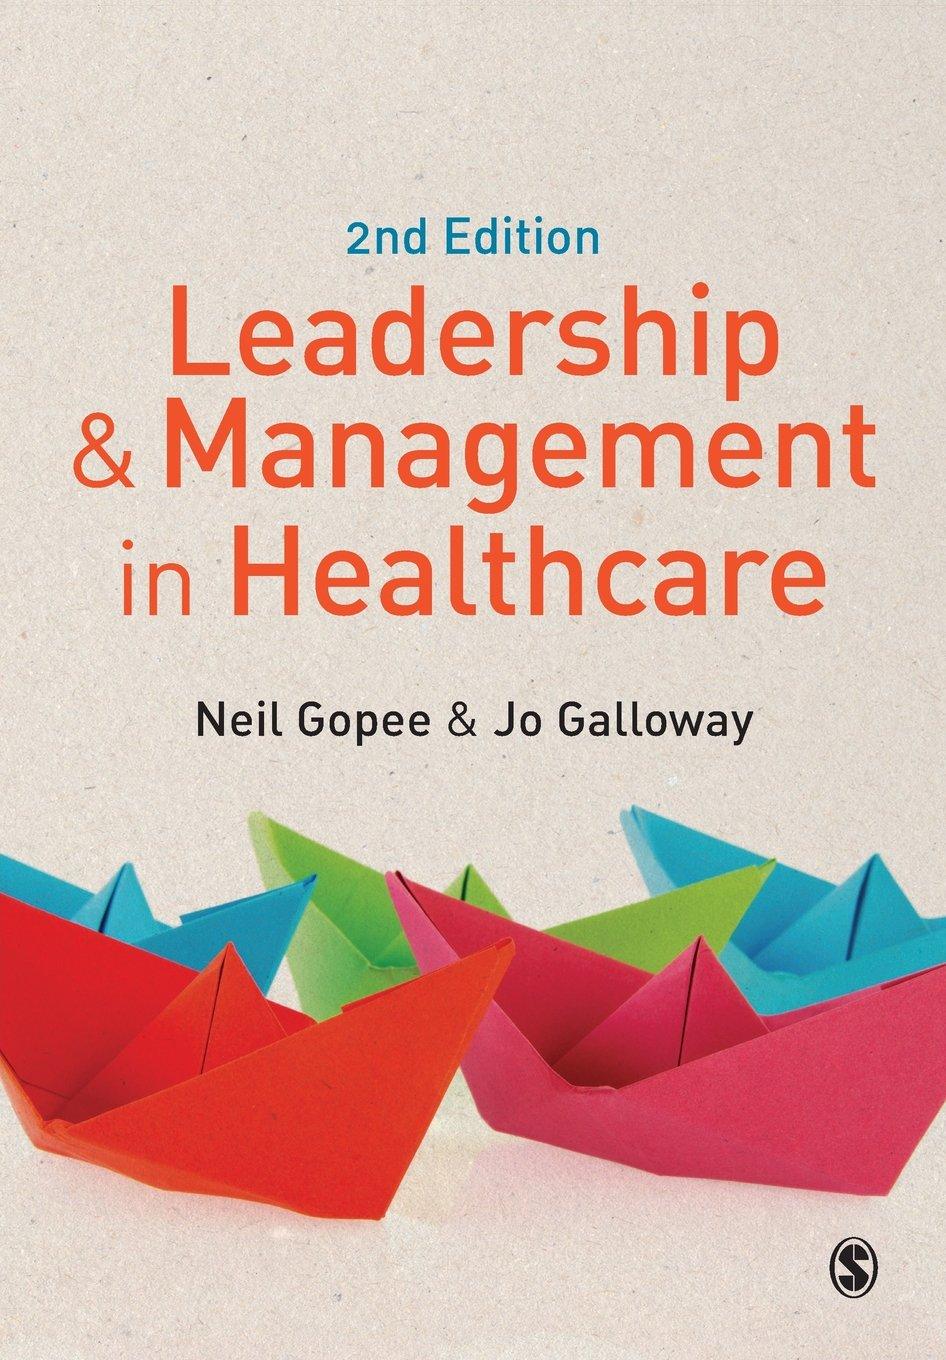 leadership and management in healthcare 2nd edition neil gopee, jo galloway 1446248828, 978-1446248829